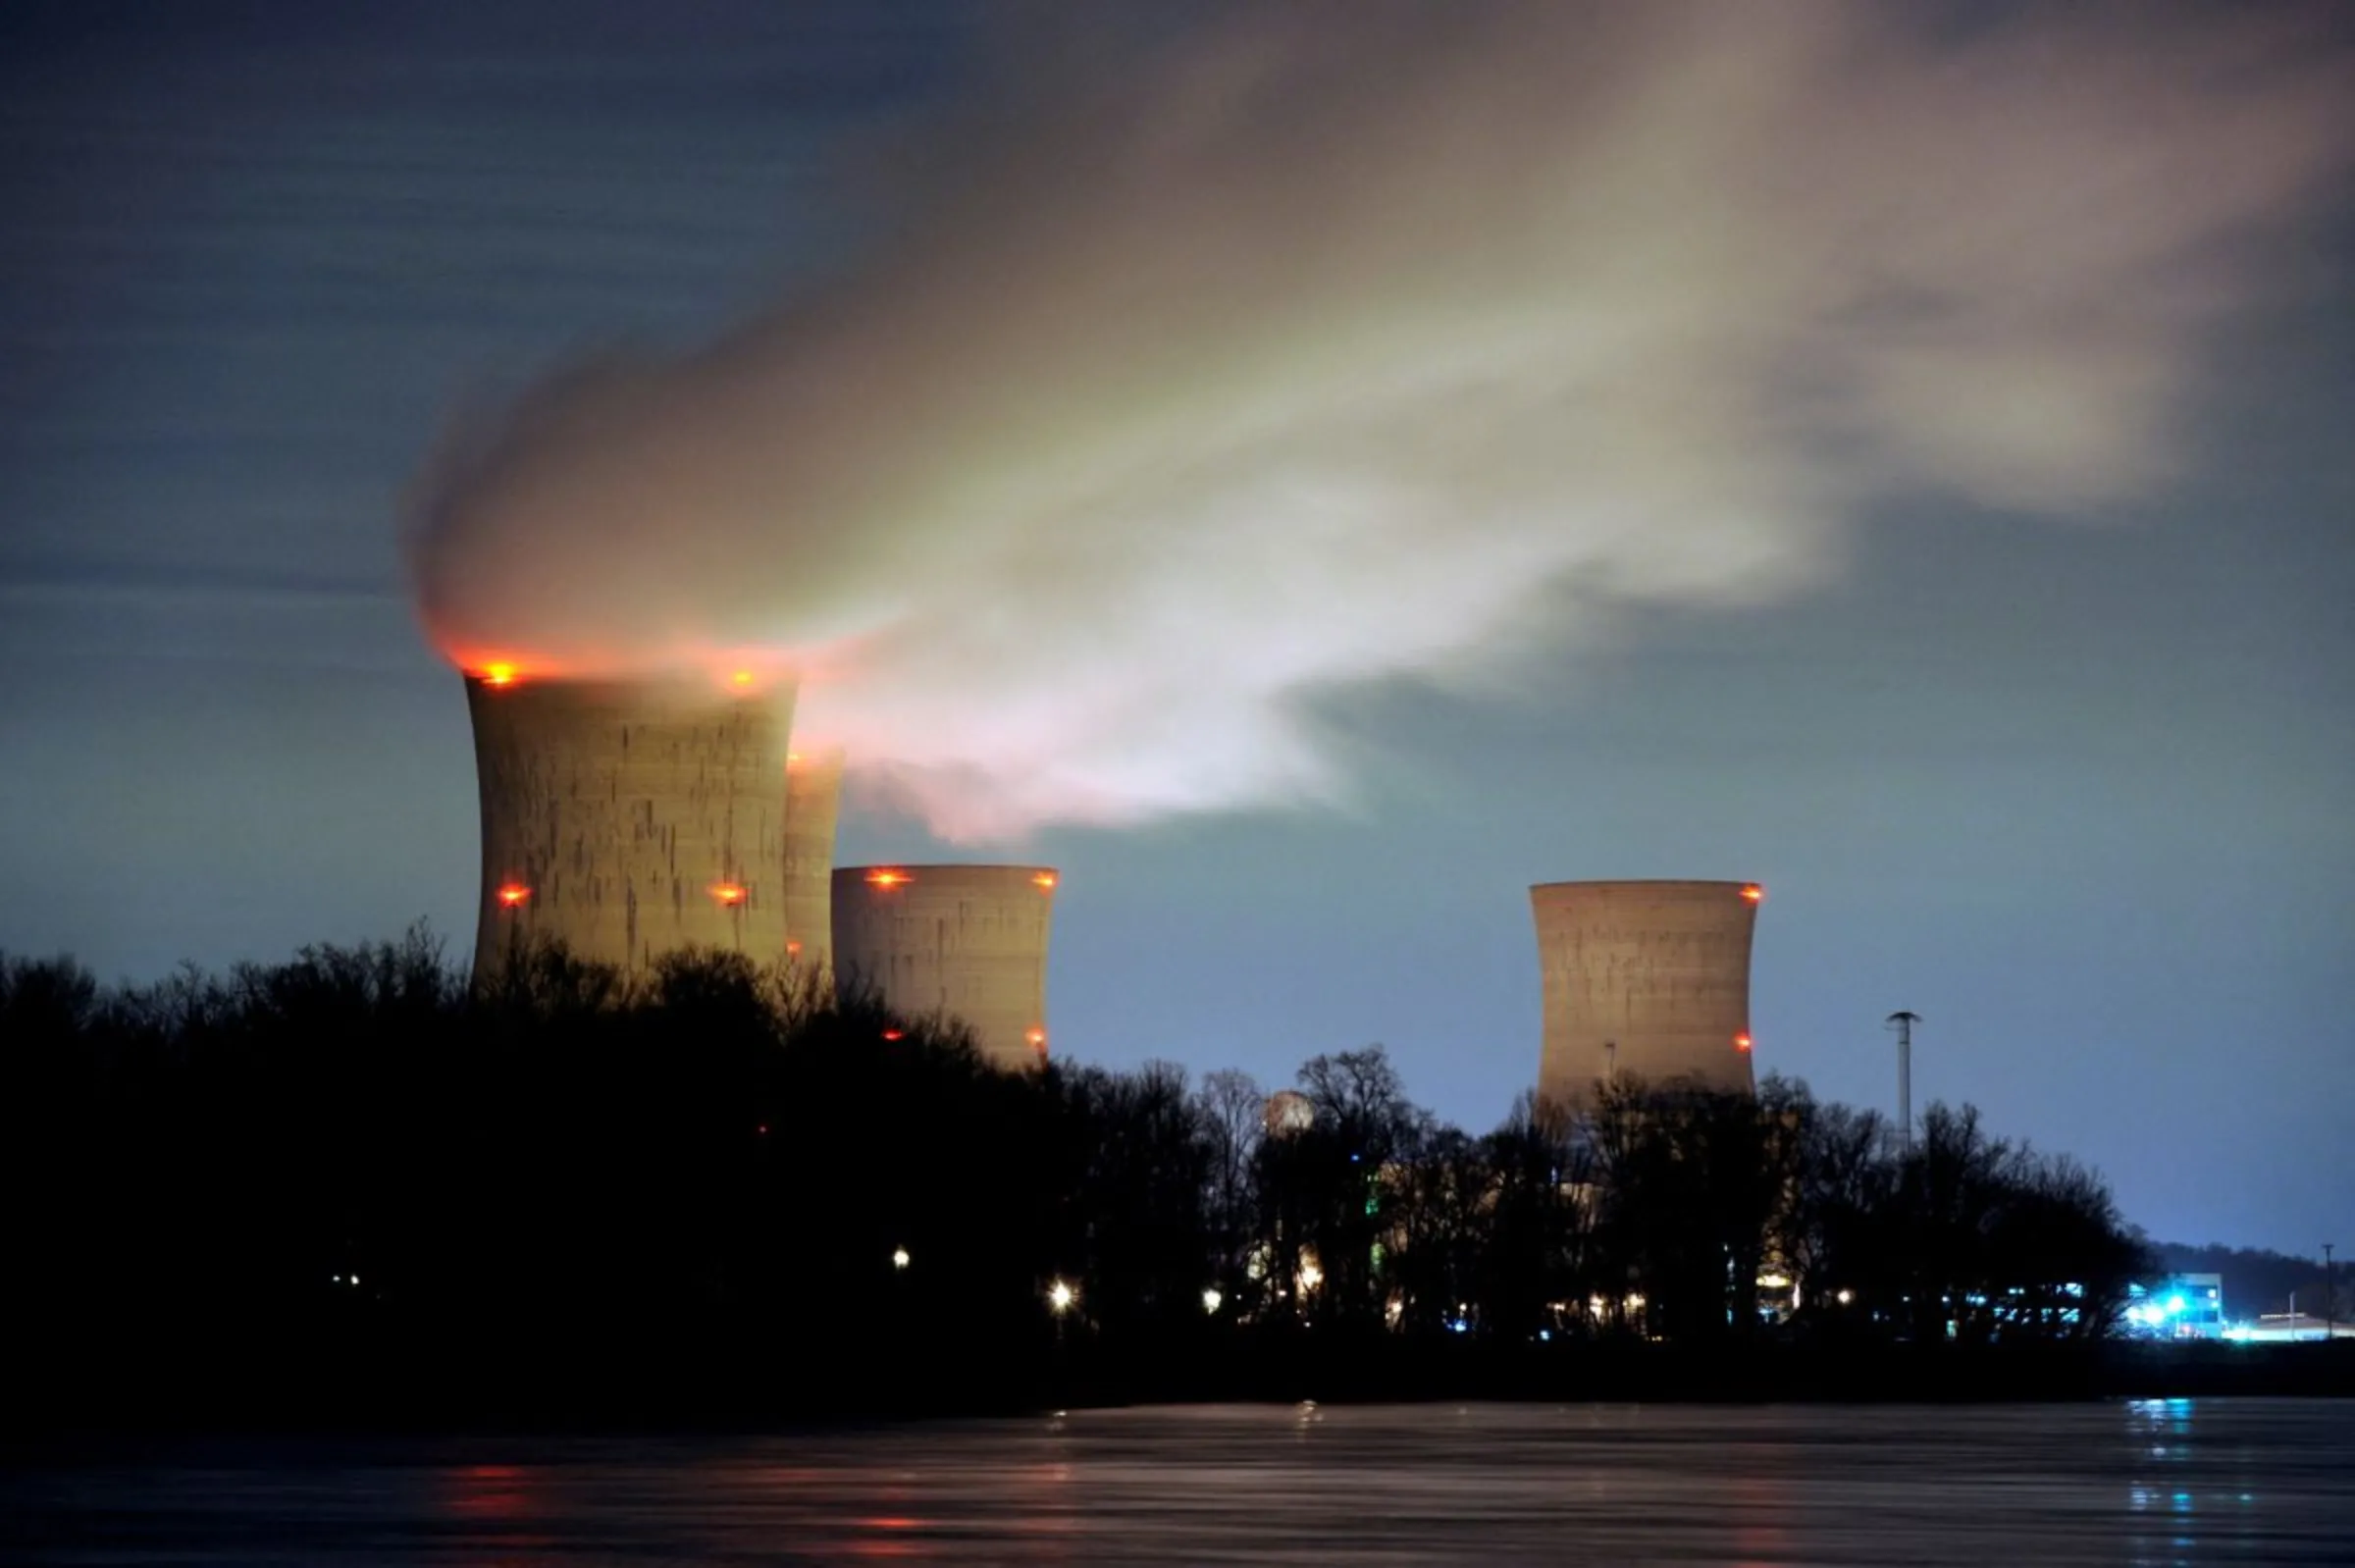 The Three Mile Island nuclear power plant is seen across the Susquehanna River in Middletown, Pennsylvania on March 15, 2011. REUTERS/Jonathan Ernst